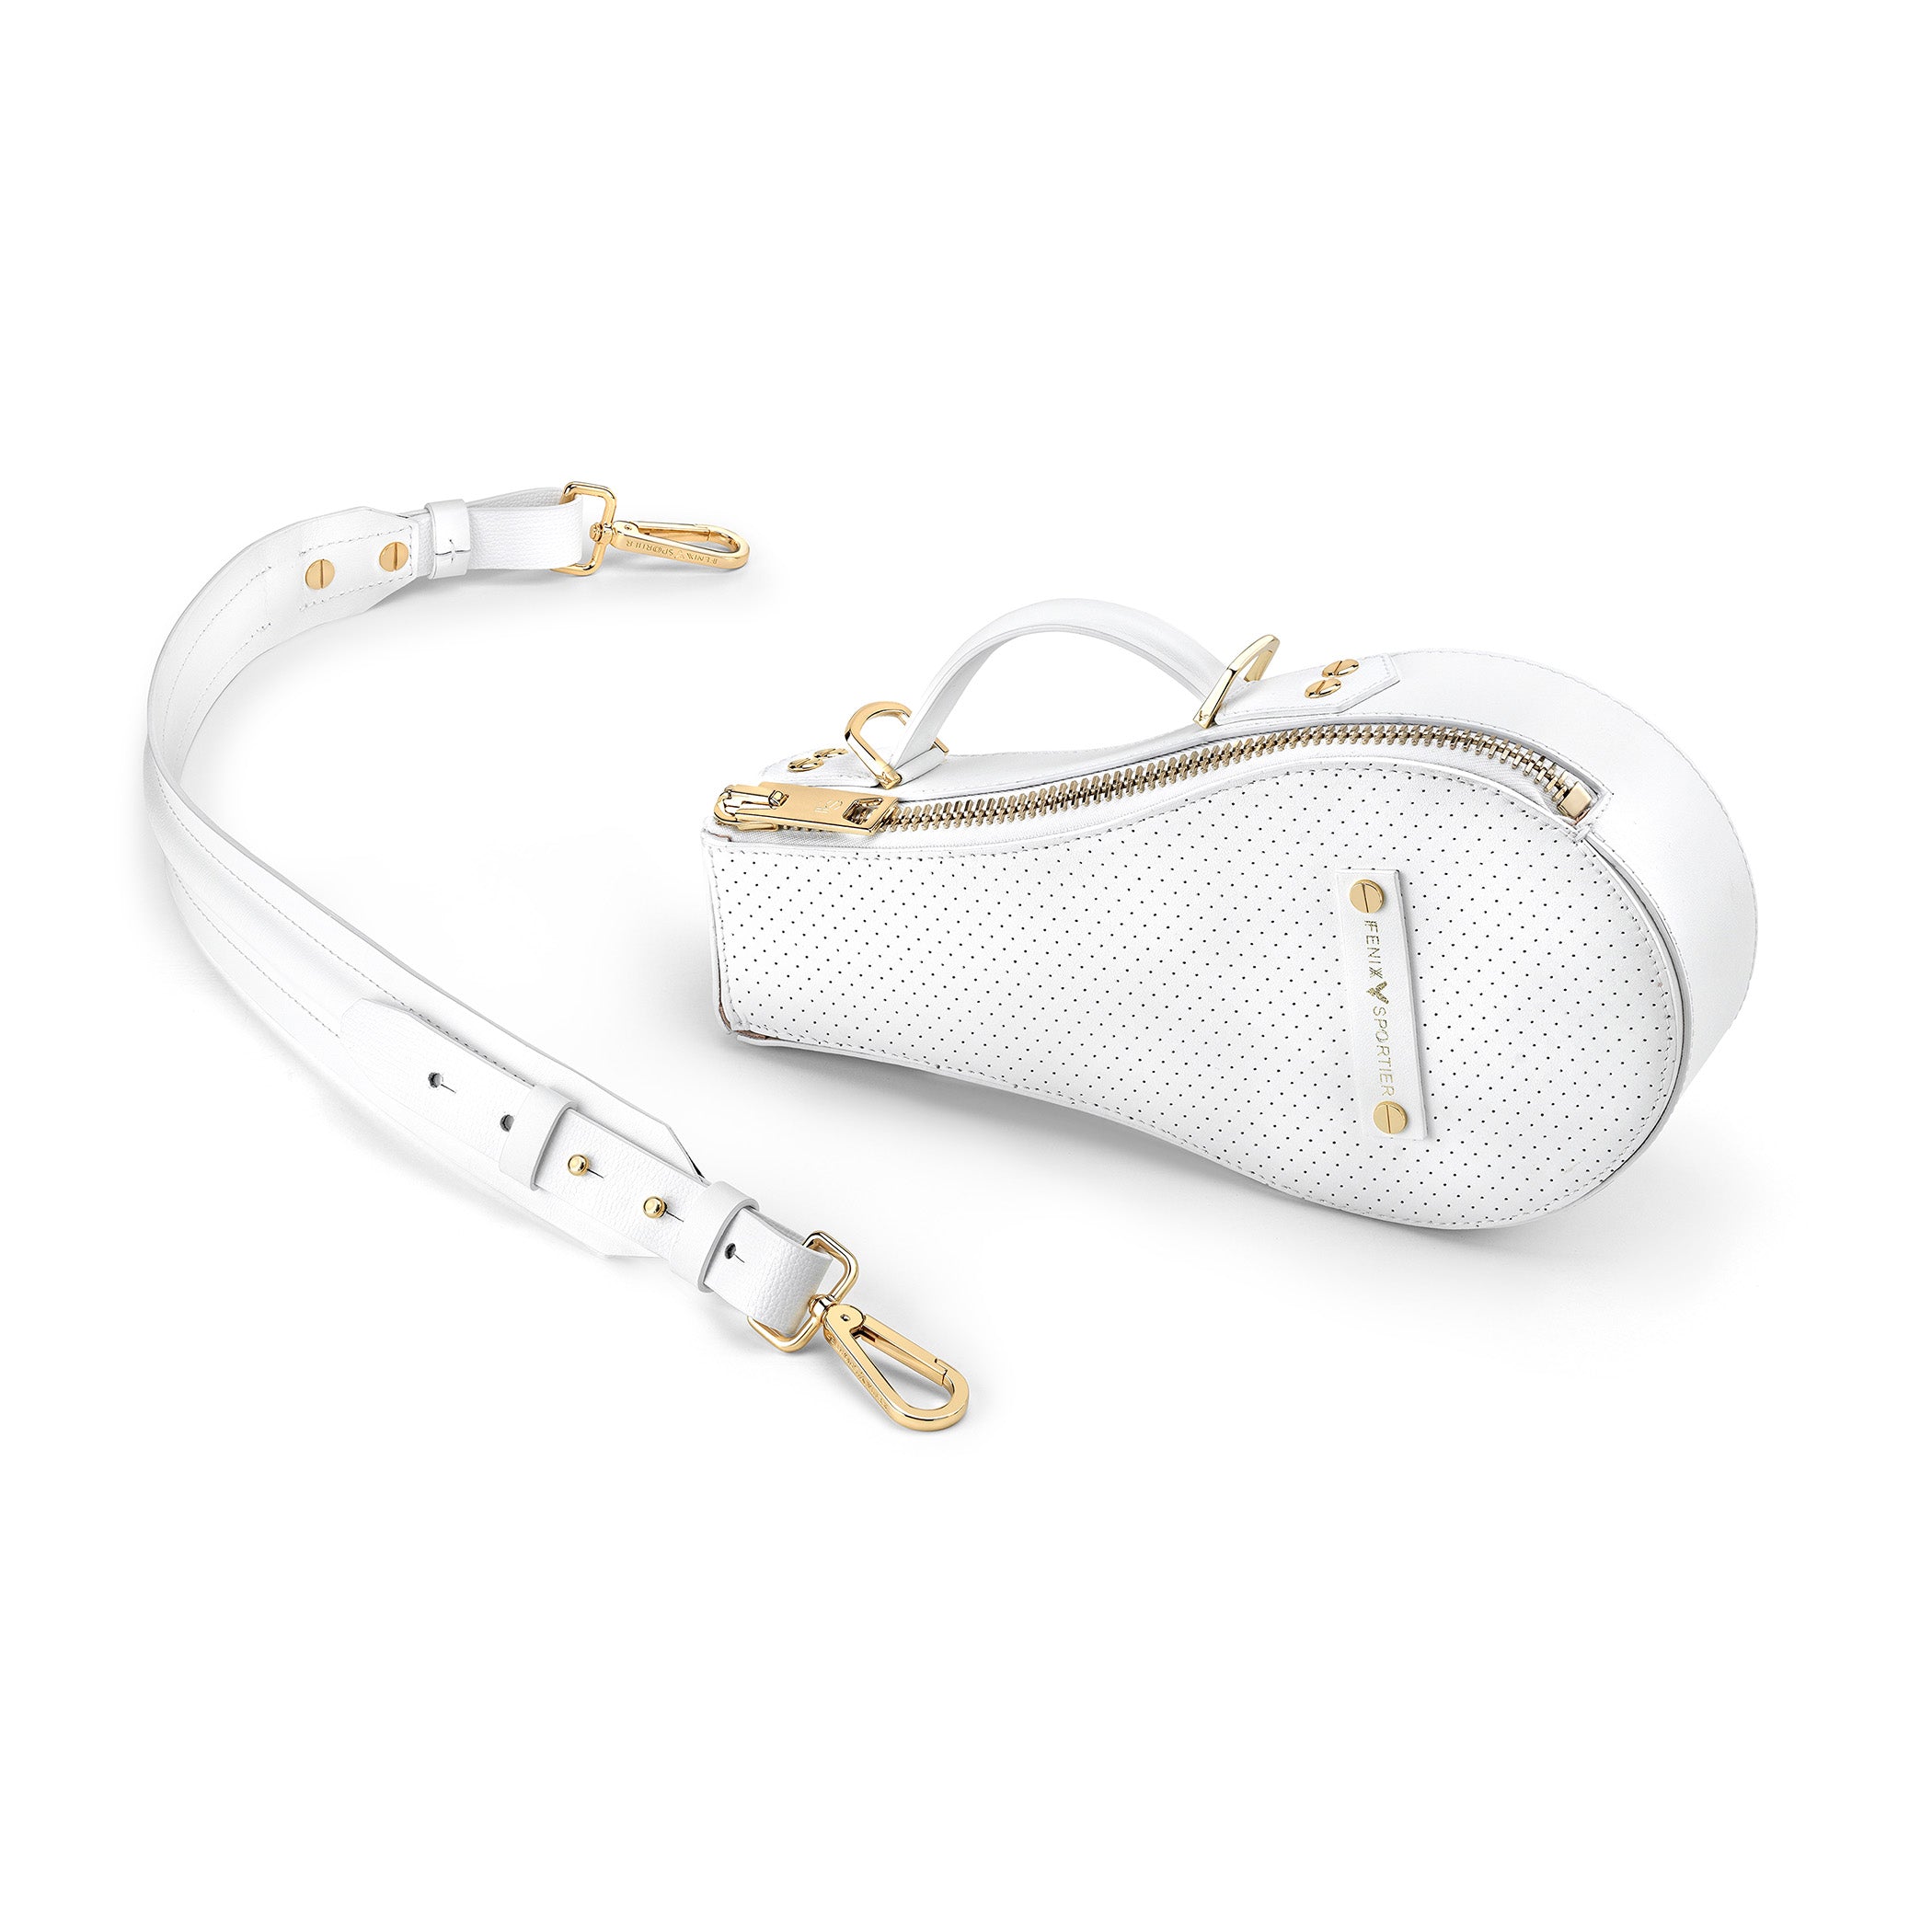 B Bag (White Leather / Suede Interior / Gold Hardware)